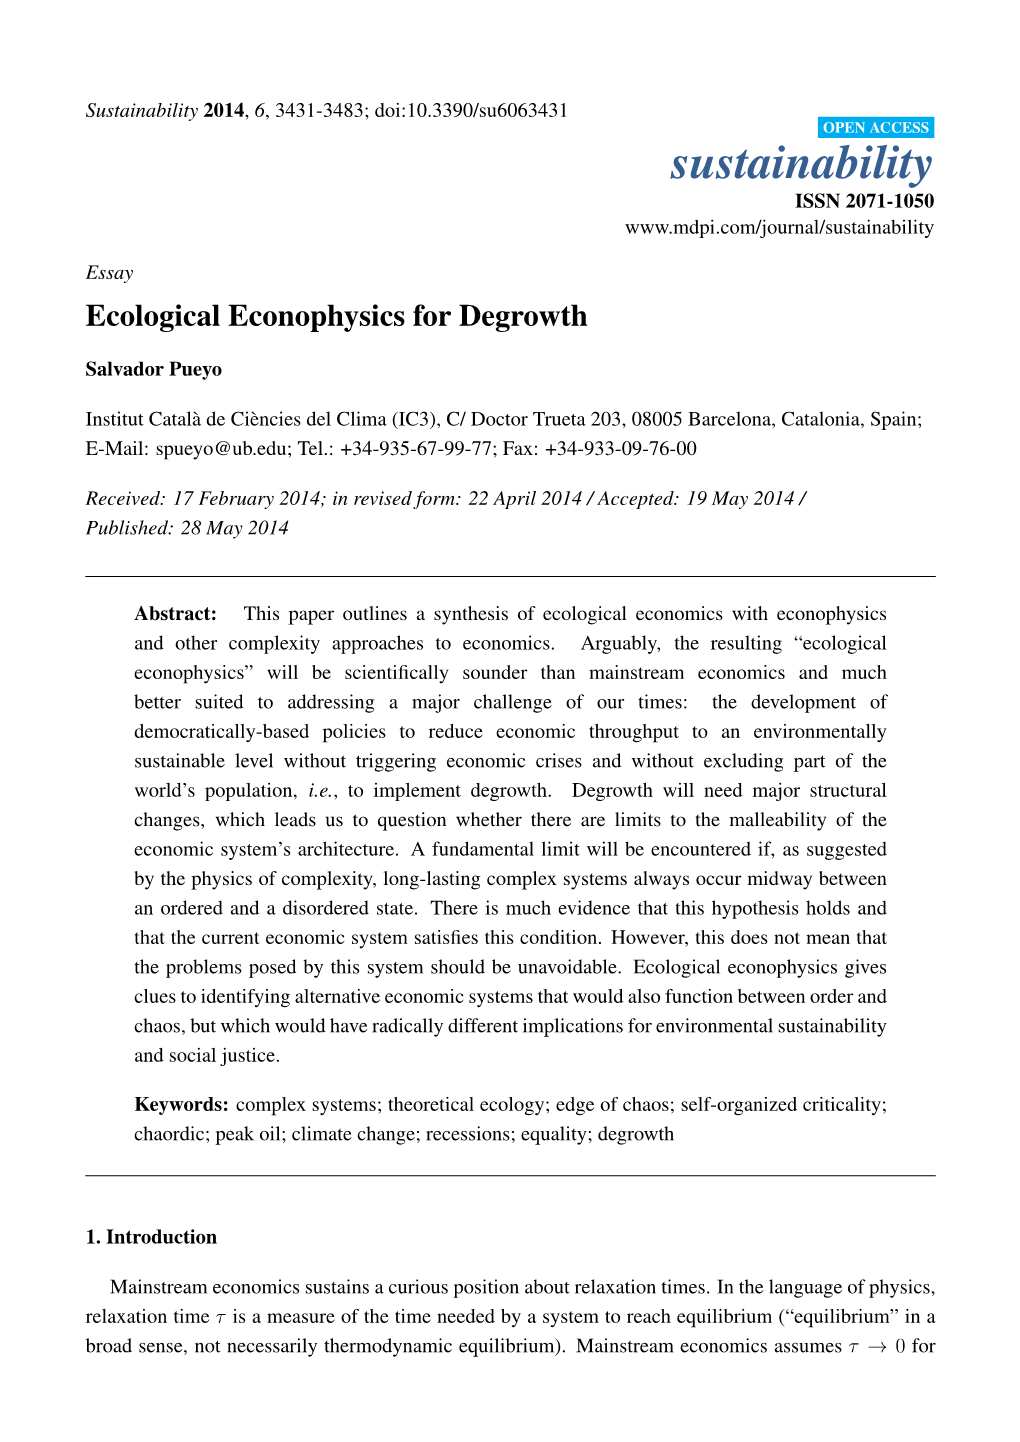 Ecological Econophysics for Degrowth